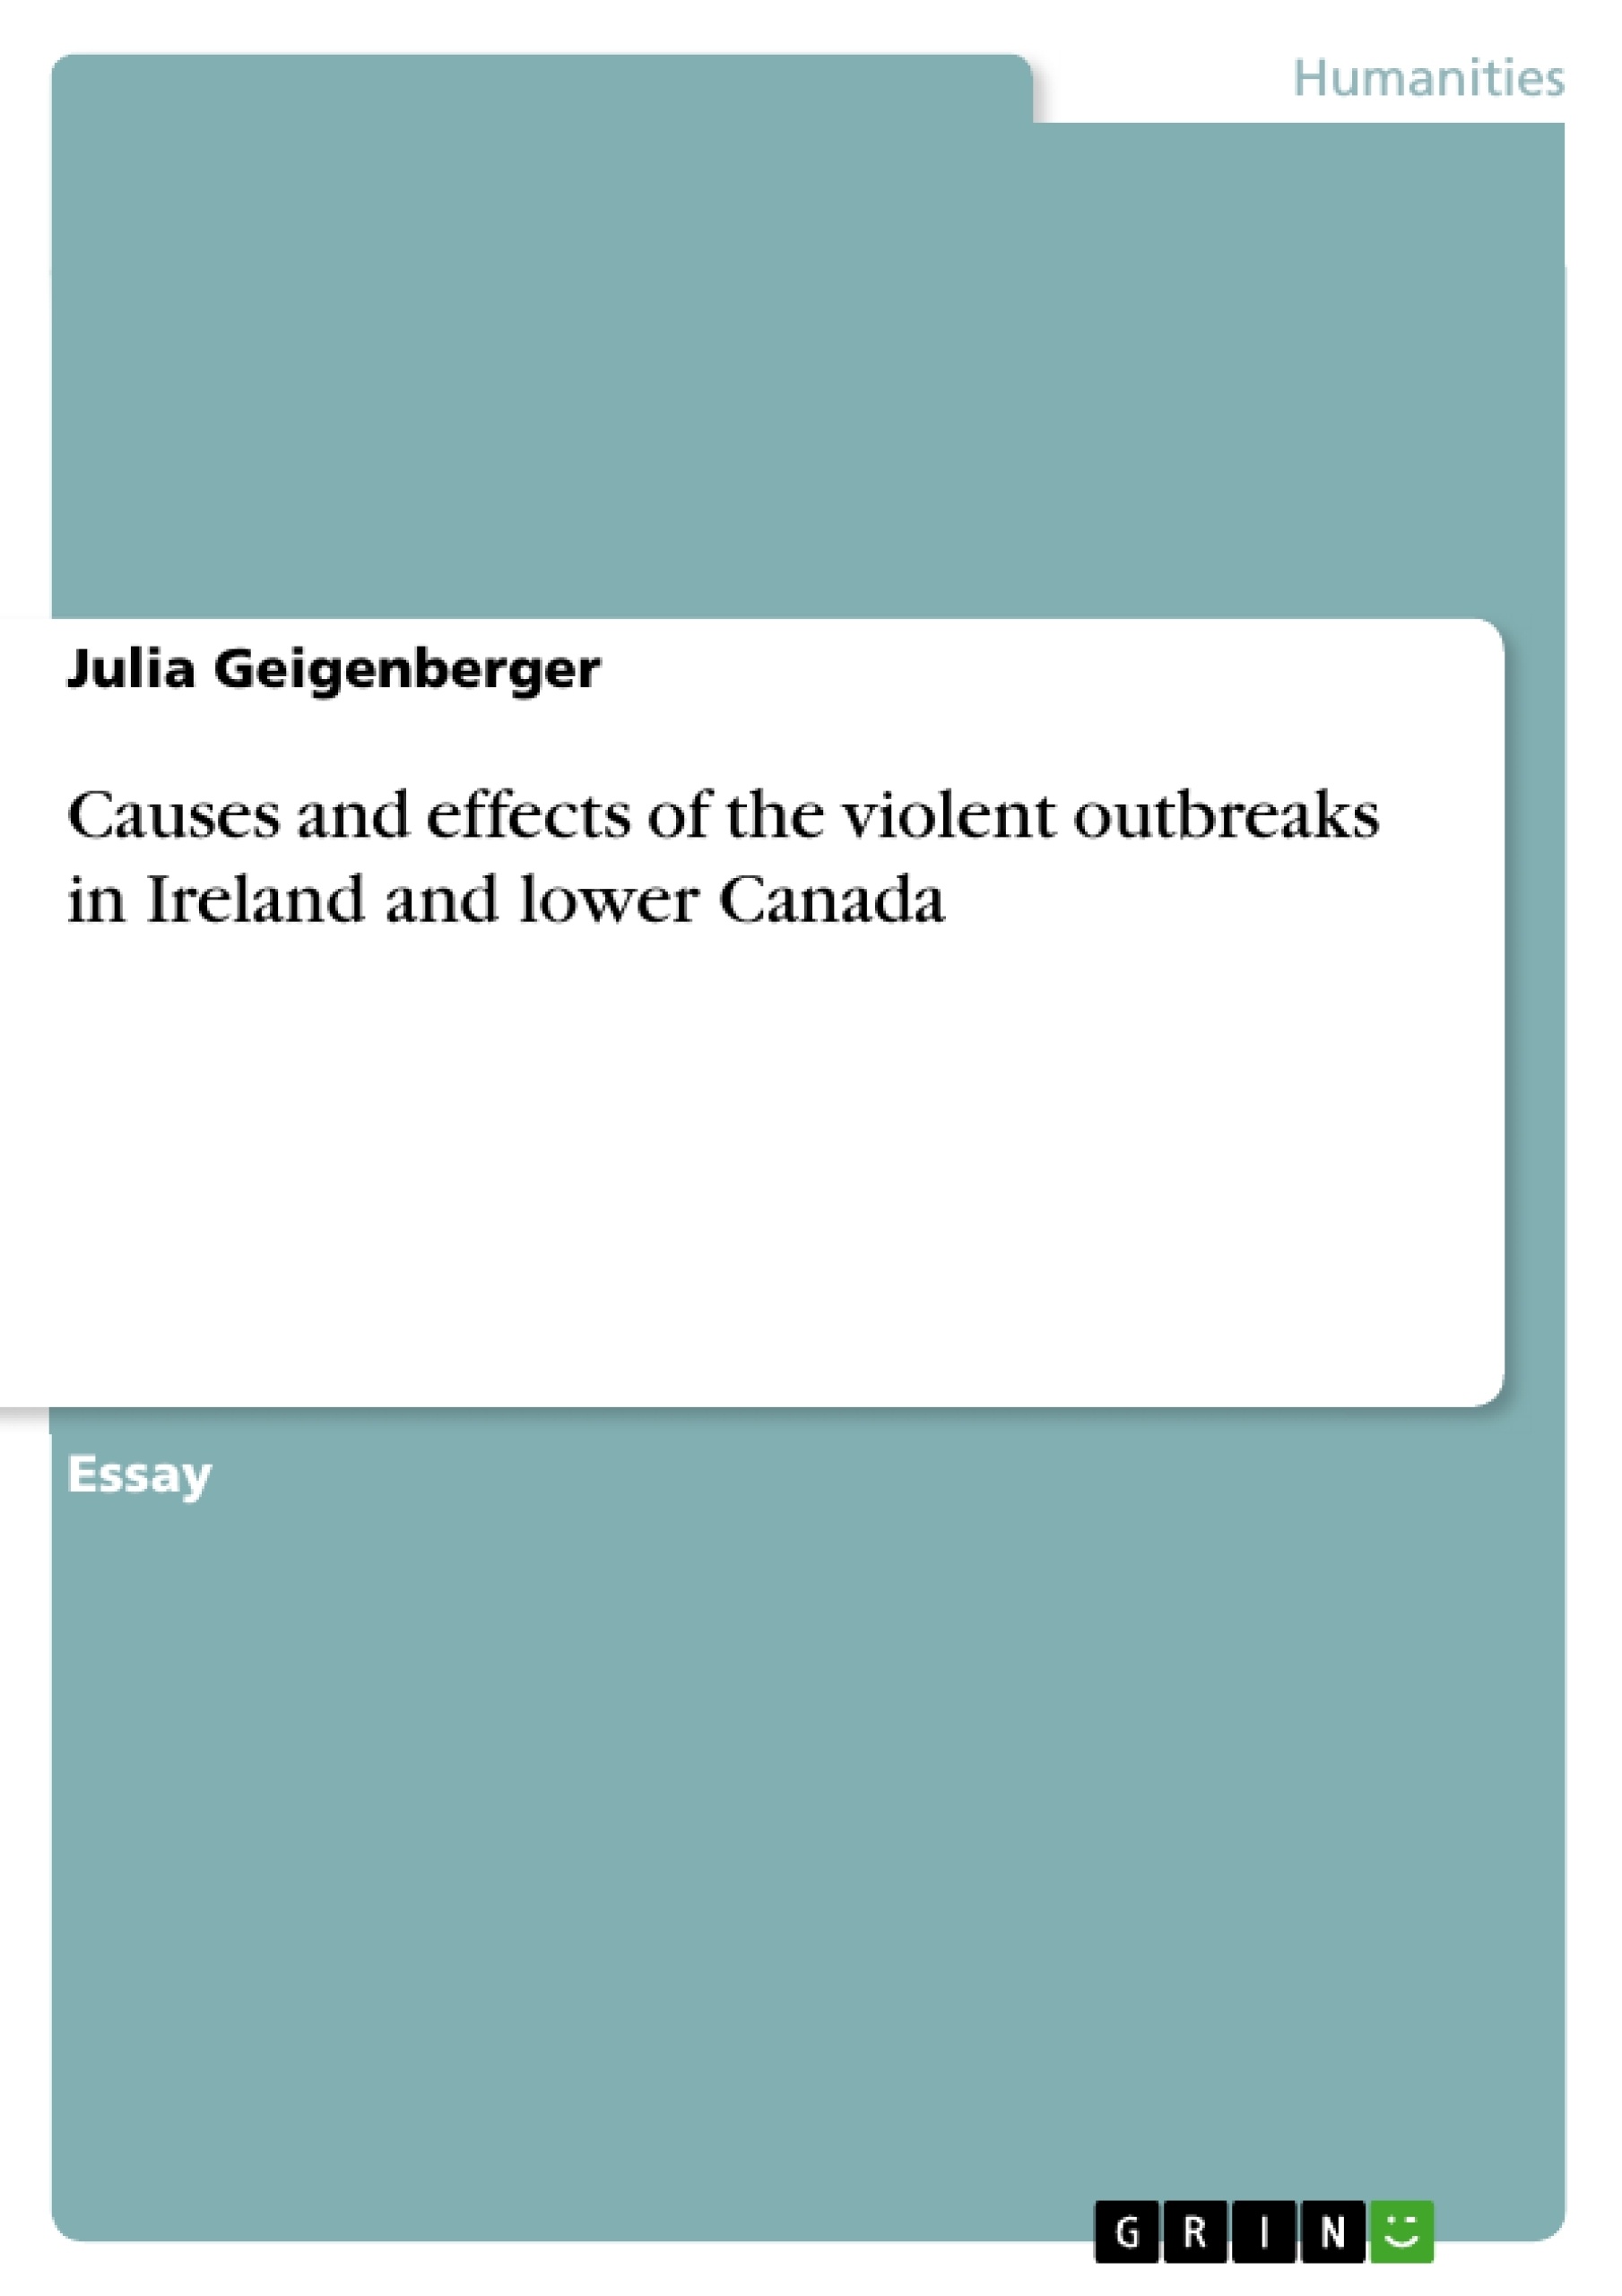 Título: Causes and effects of the violent outbreaks in Ireland and lower Canada